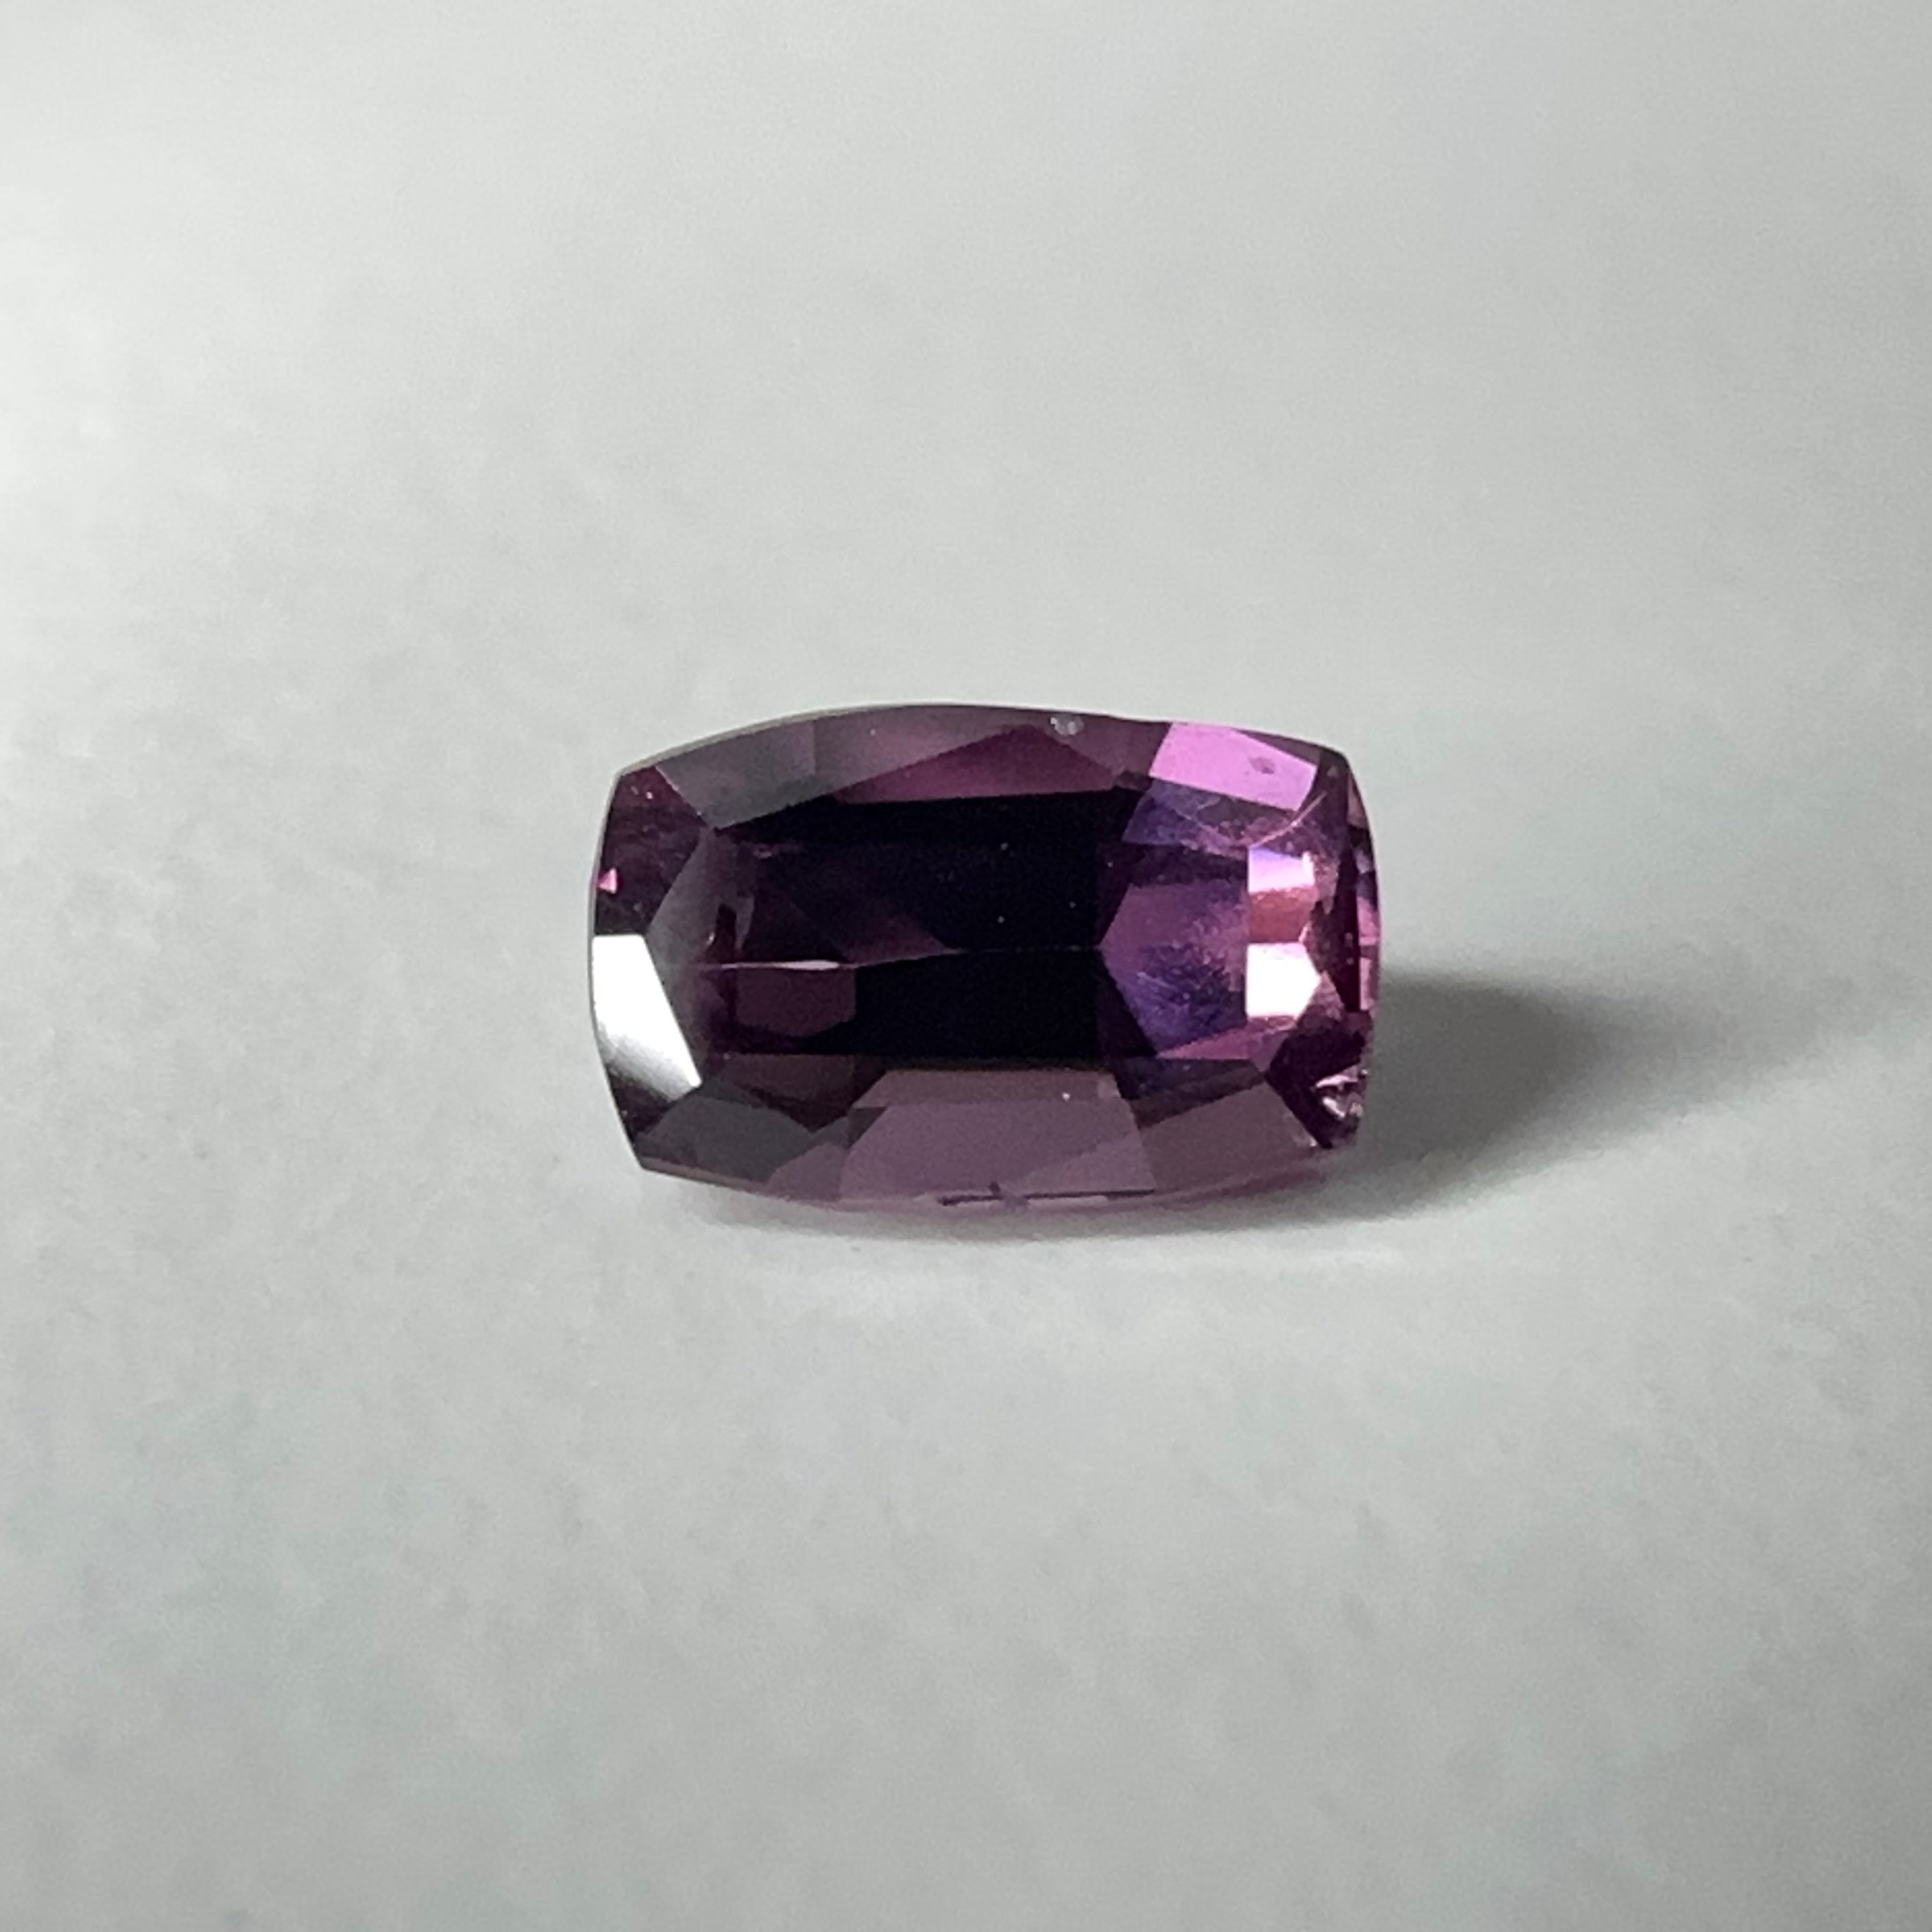 1.22ct Spinel Mahenge, Tanzania. Untreated Unheated, slightly included, see pictures of the back